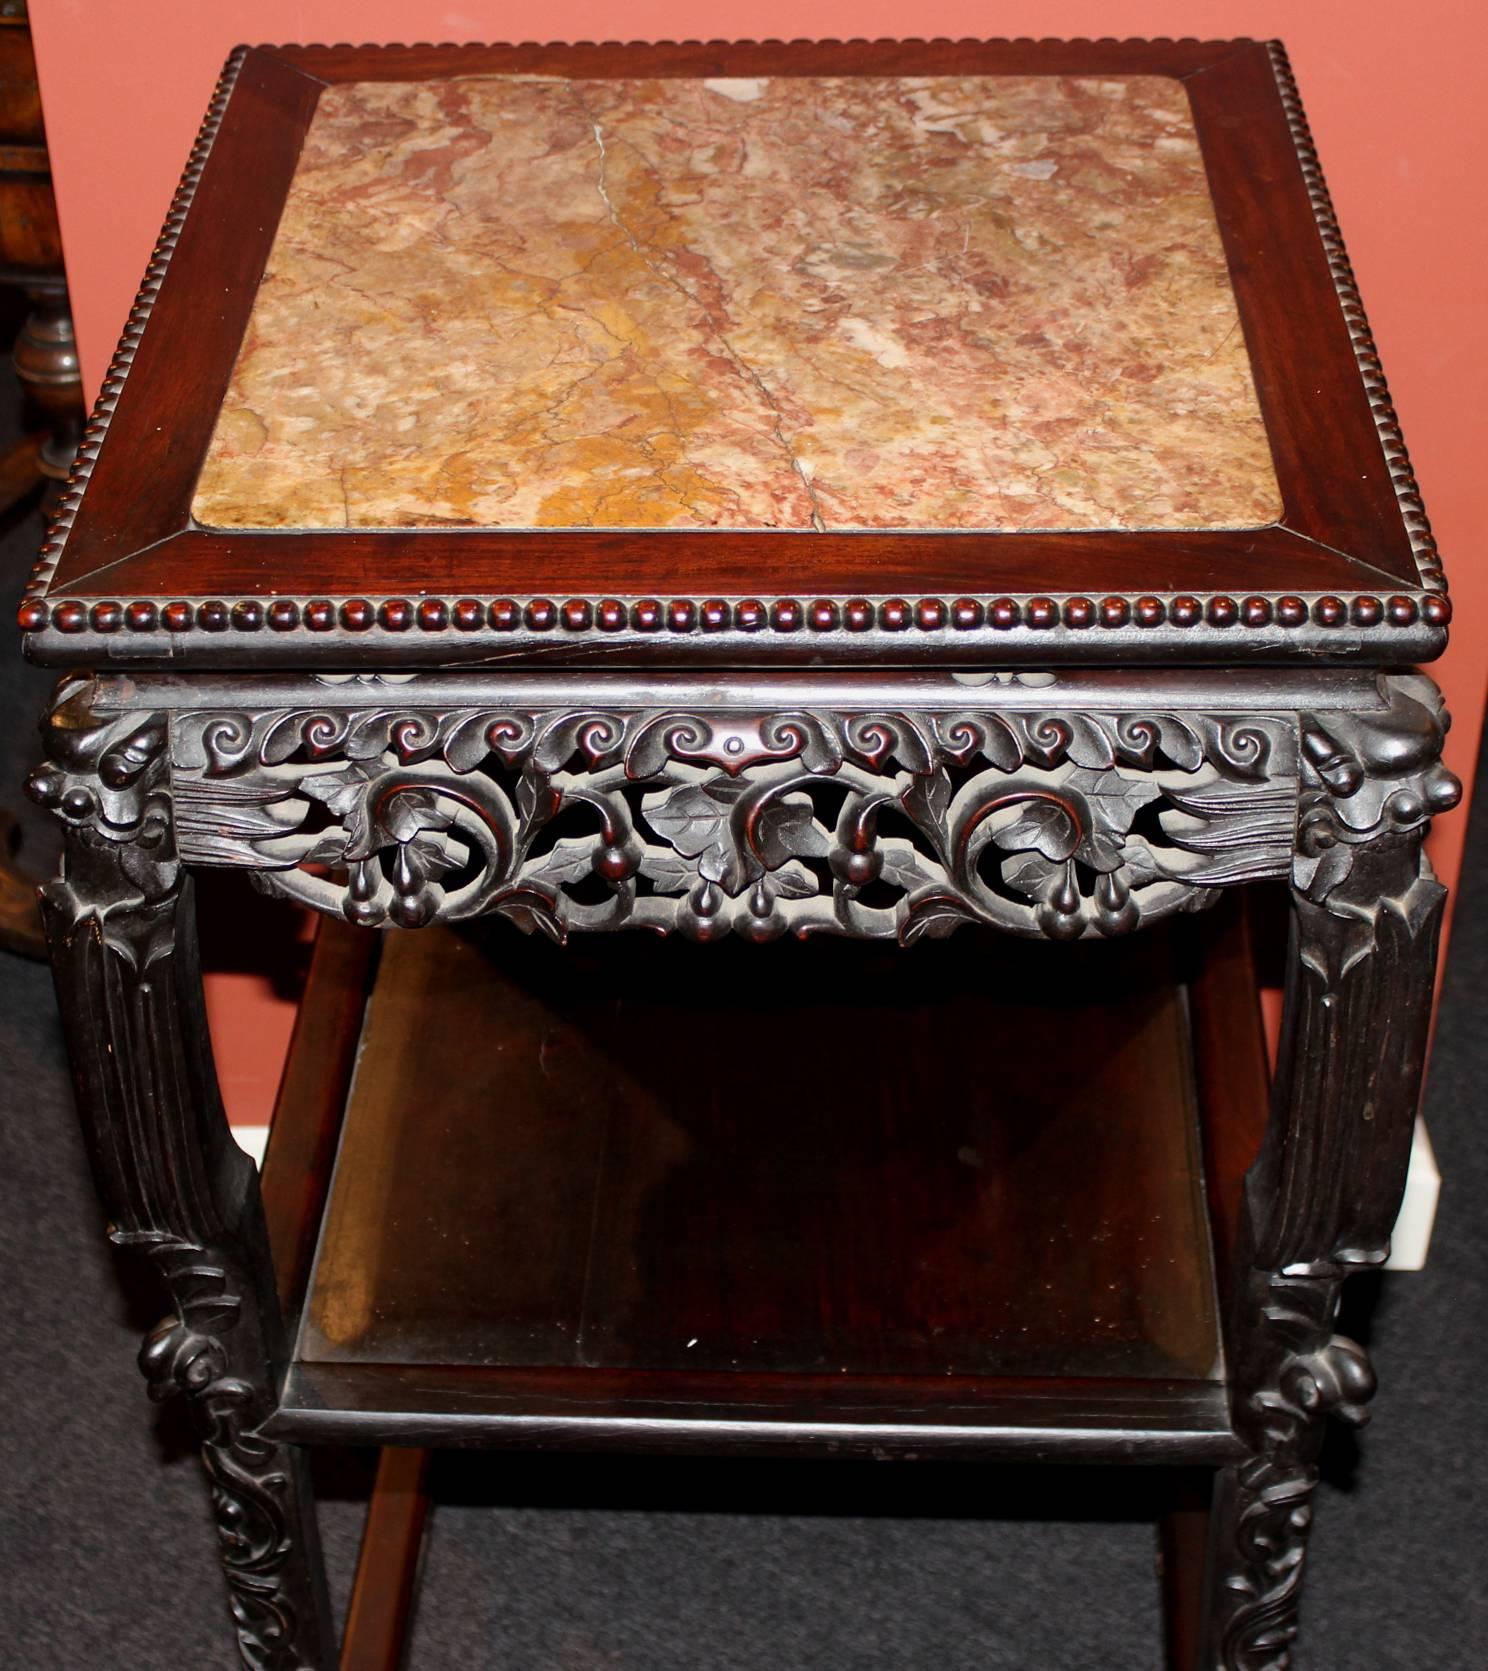 A fine example of a Chinese rosewood stand with medial and lower shelf or tier, inset marble top with crack, and beautifully carved apron and legs. Dates to the 19th century.